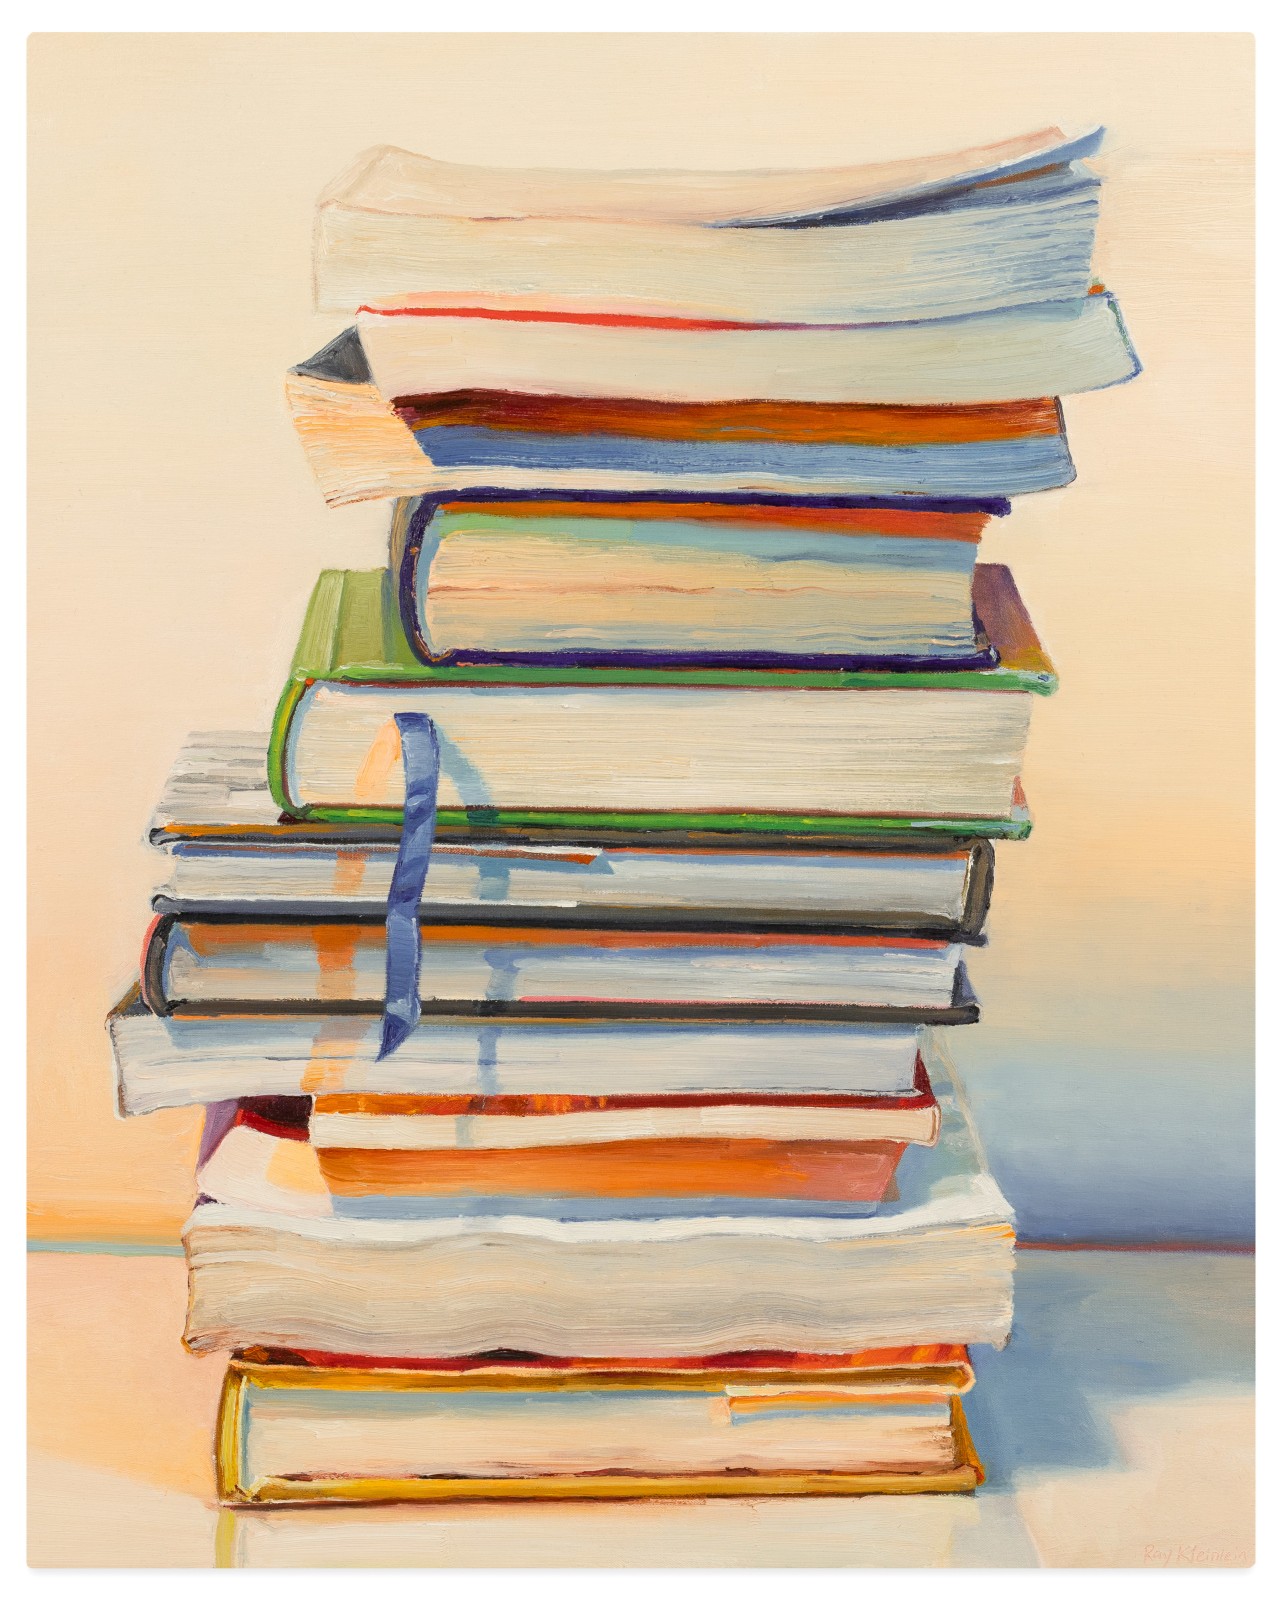 Ray Kleinlein: Recent Paintings - Opening Reception: Saturday, April 20th, 3 to 5pm, Artist talk at 3:30 pm, Book signing at 4:15 pm - Exhibitions - Paul Thiebaud Gallery